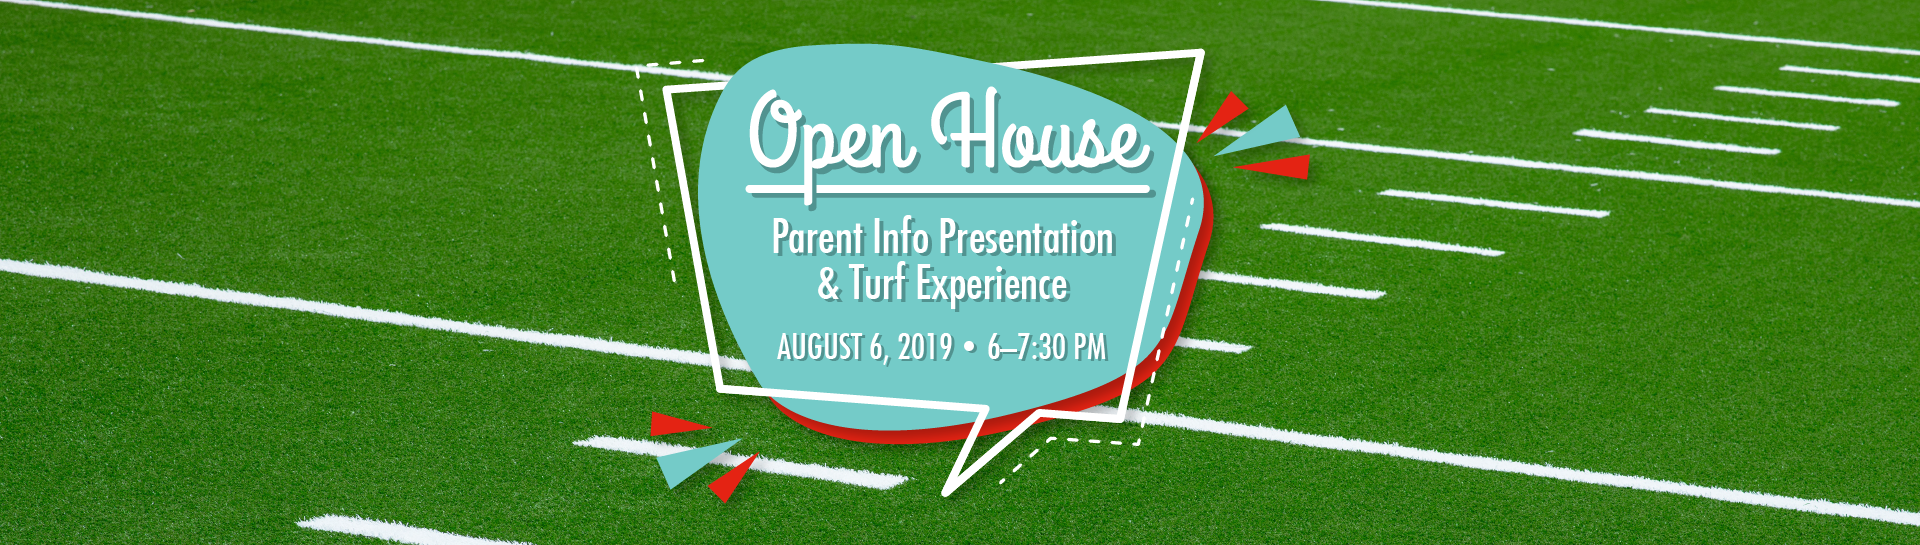 Open House Parent Info Presentation and Turf Experience - August 6